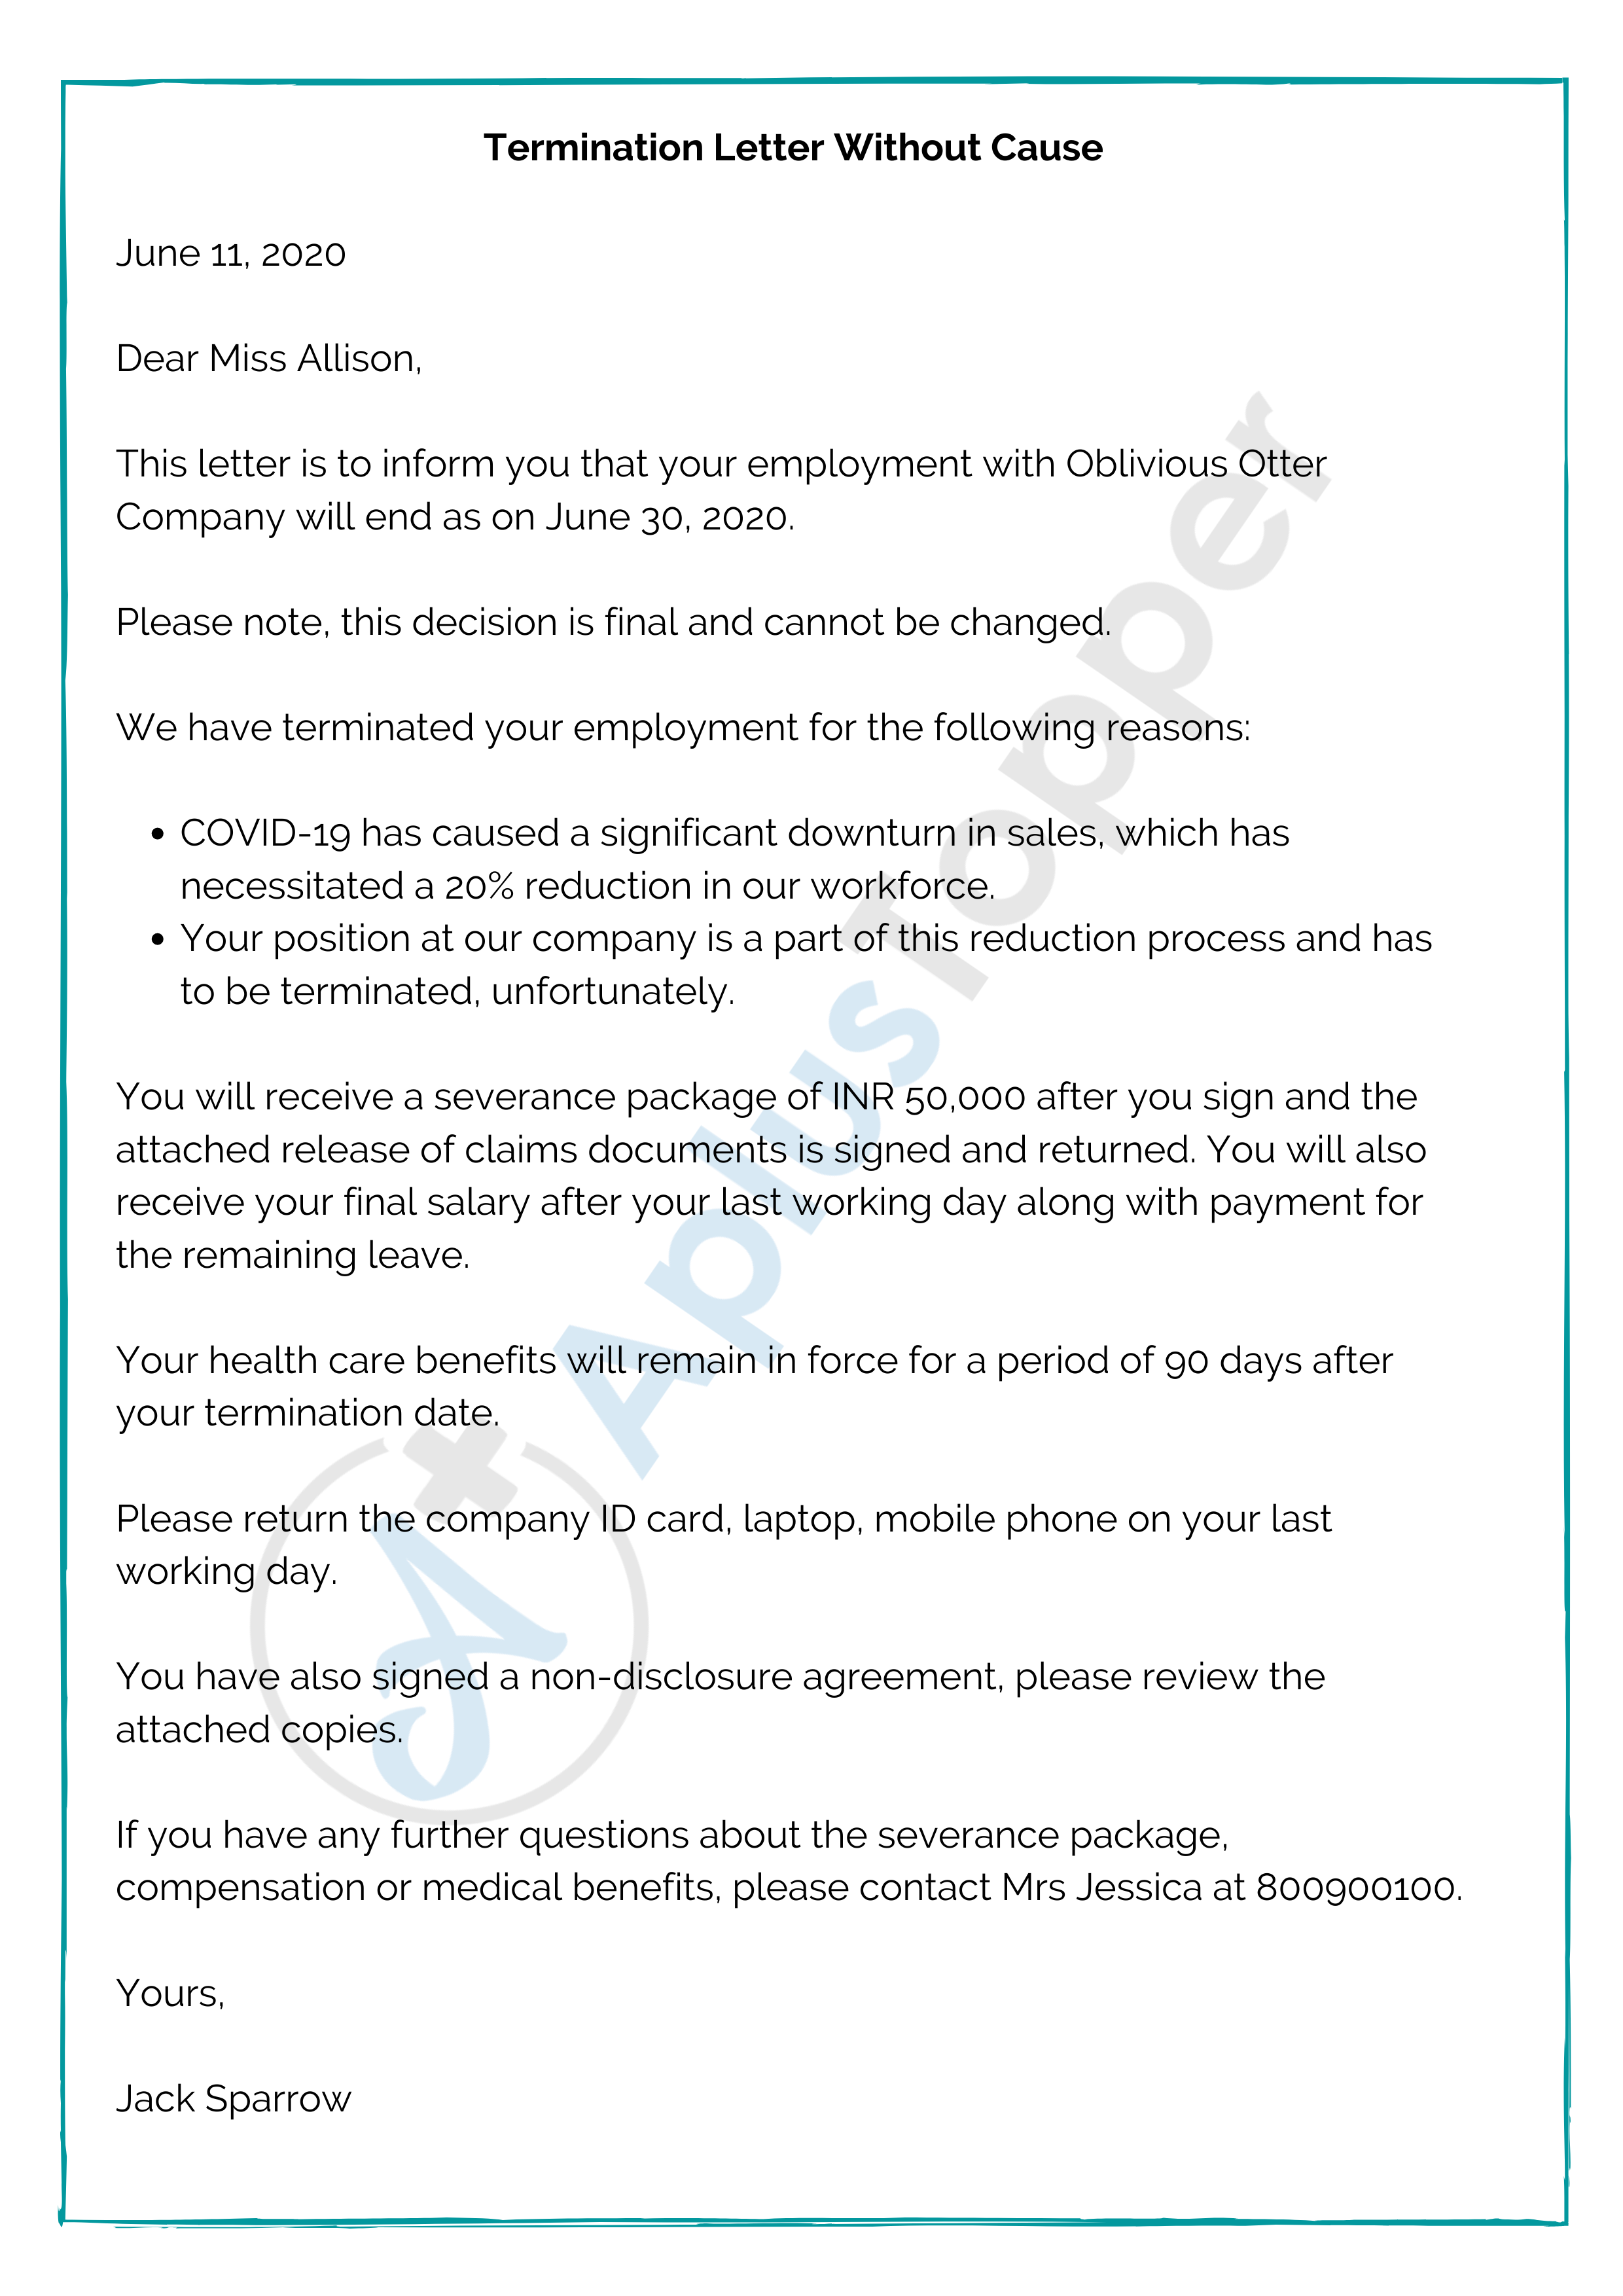 Termination Letter to Employee